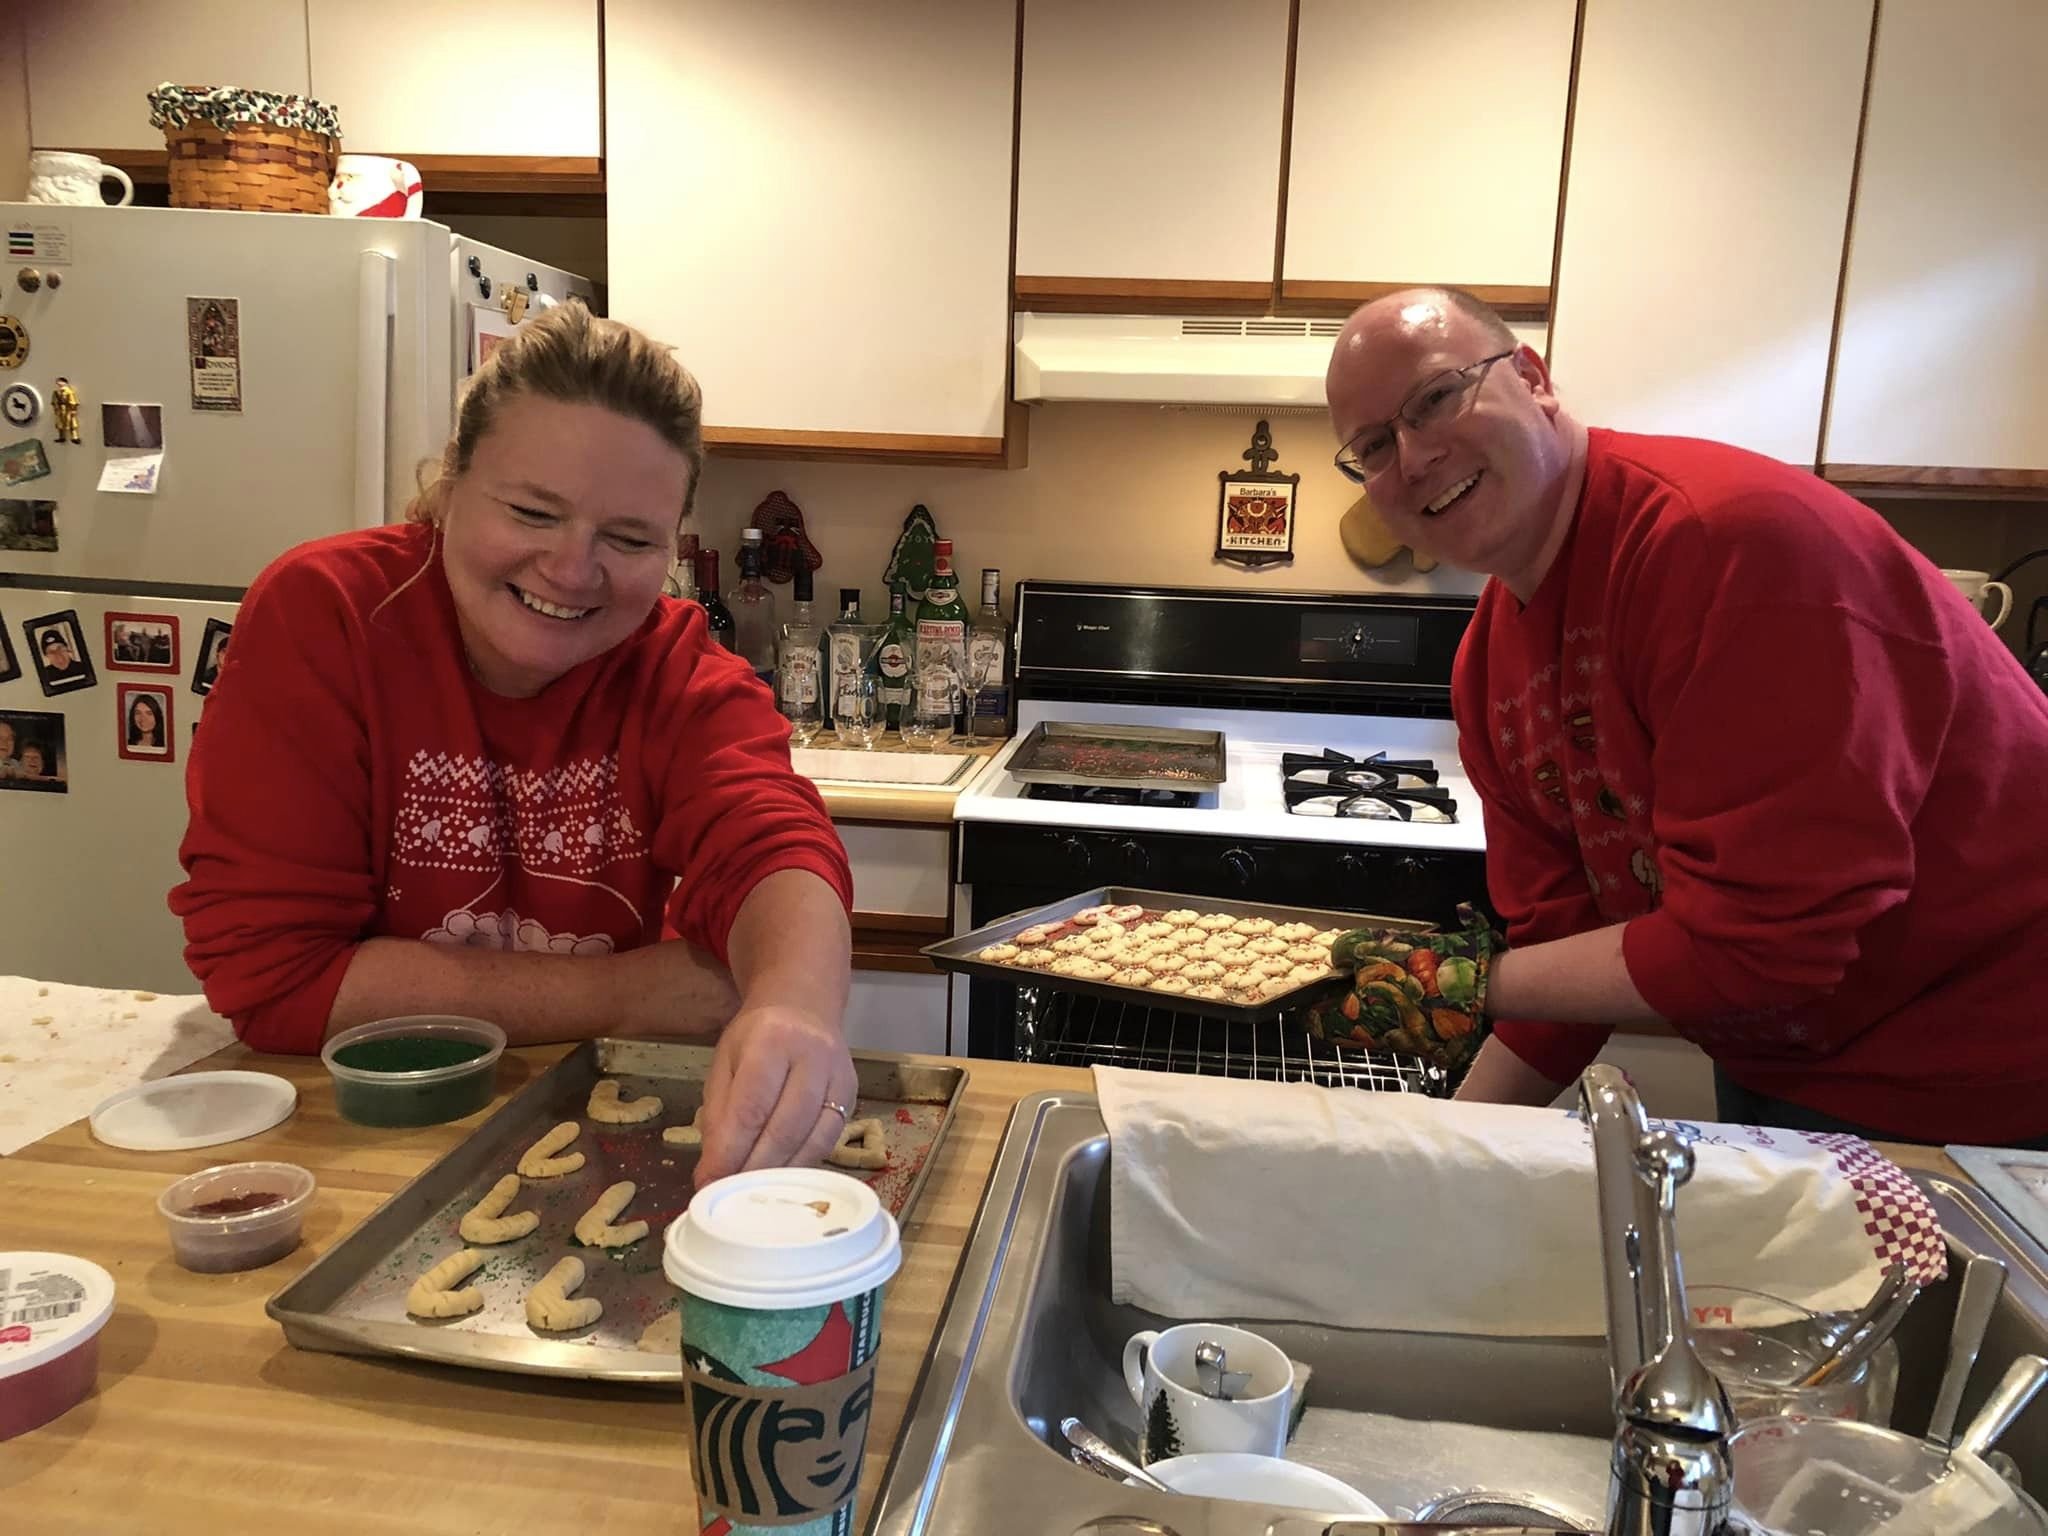  Brother Dan Wisniewski, OSFS, and his sister Janice celebrated their annual Christmas butter cookie baking. 